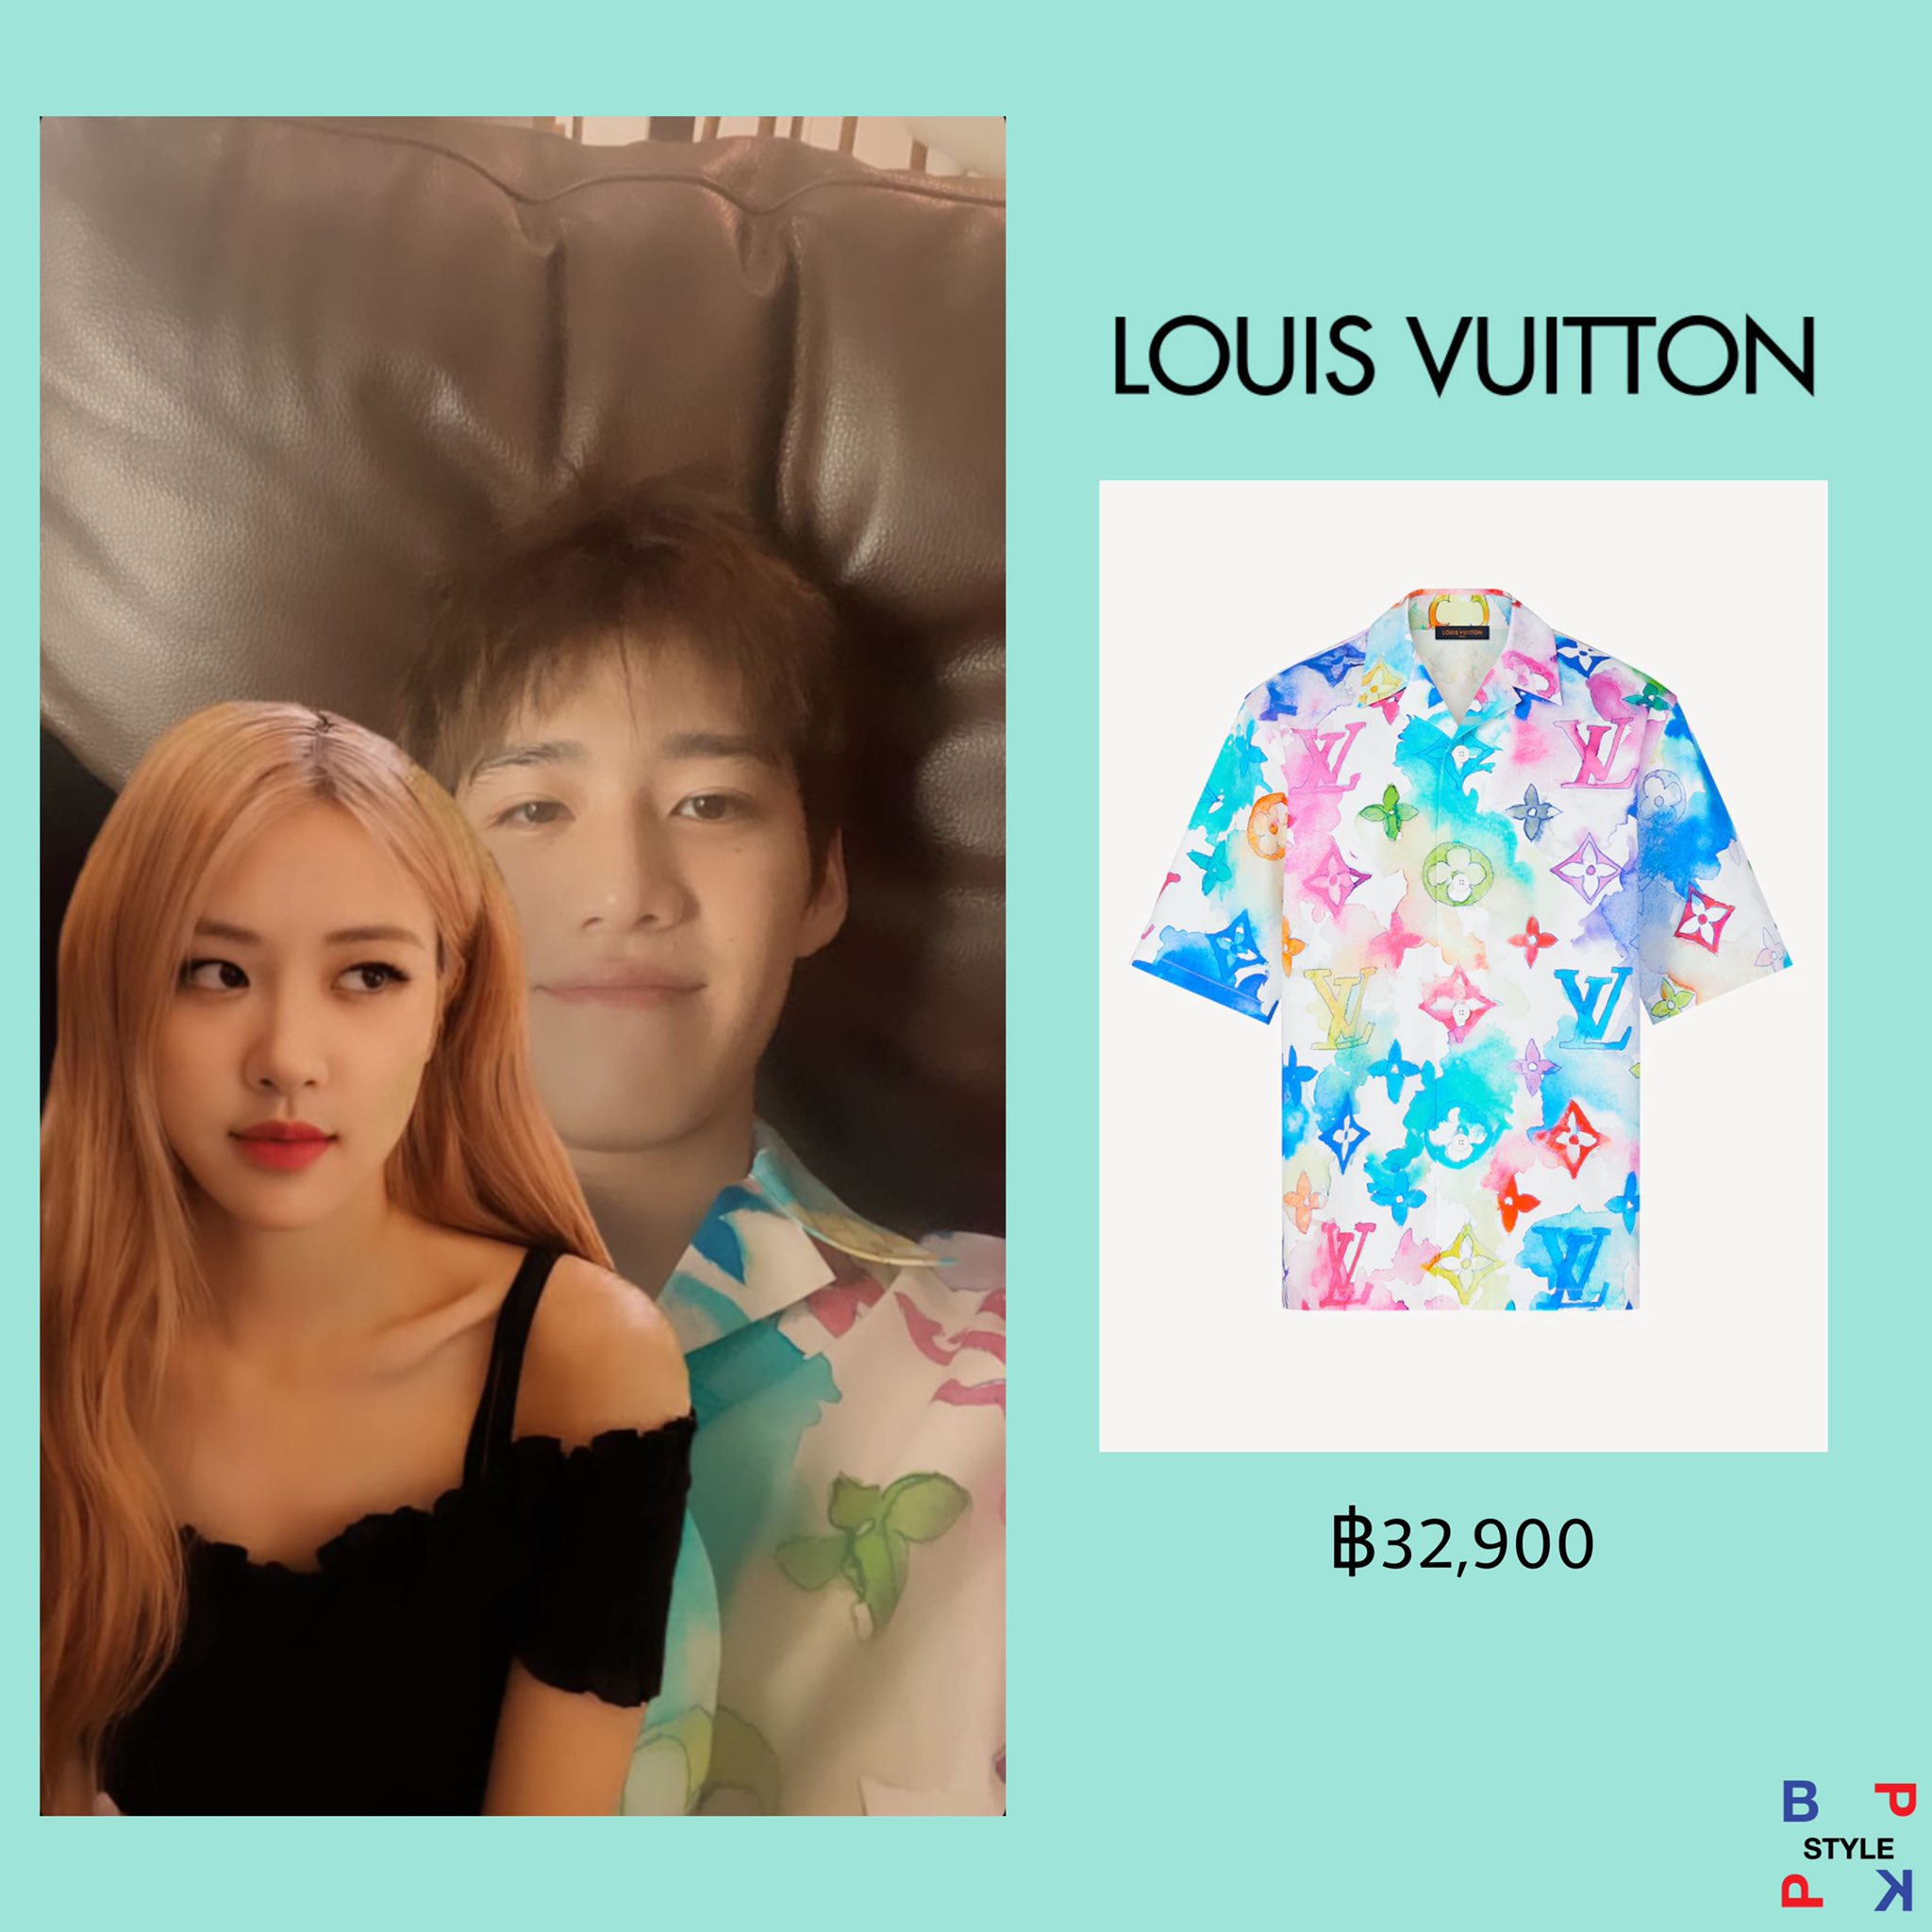 BKPP STYLE on X: #LouisVuitton MULTICOLOR WATERCOLOR SHIRT 32,900 THB  #ppkritt #bkpp #bkppstyle  / X